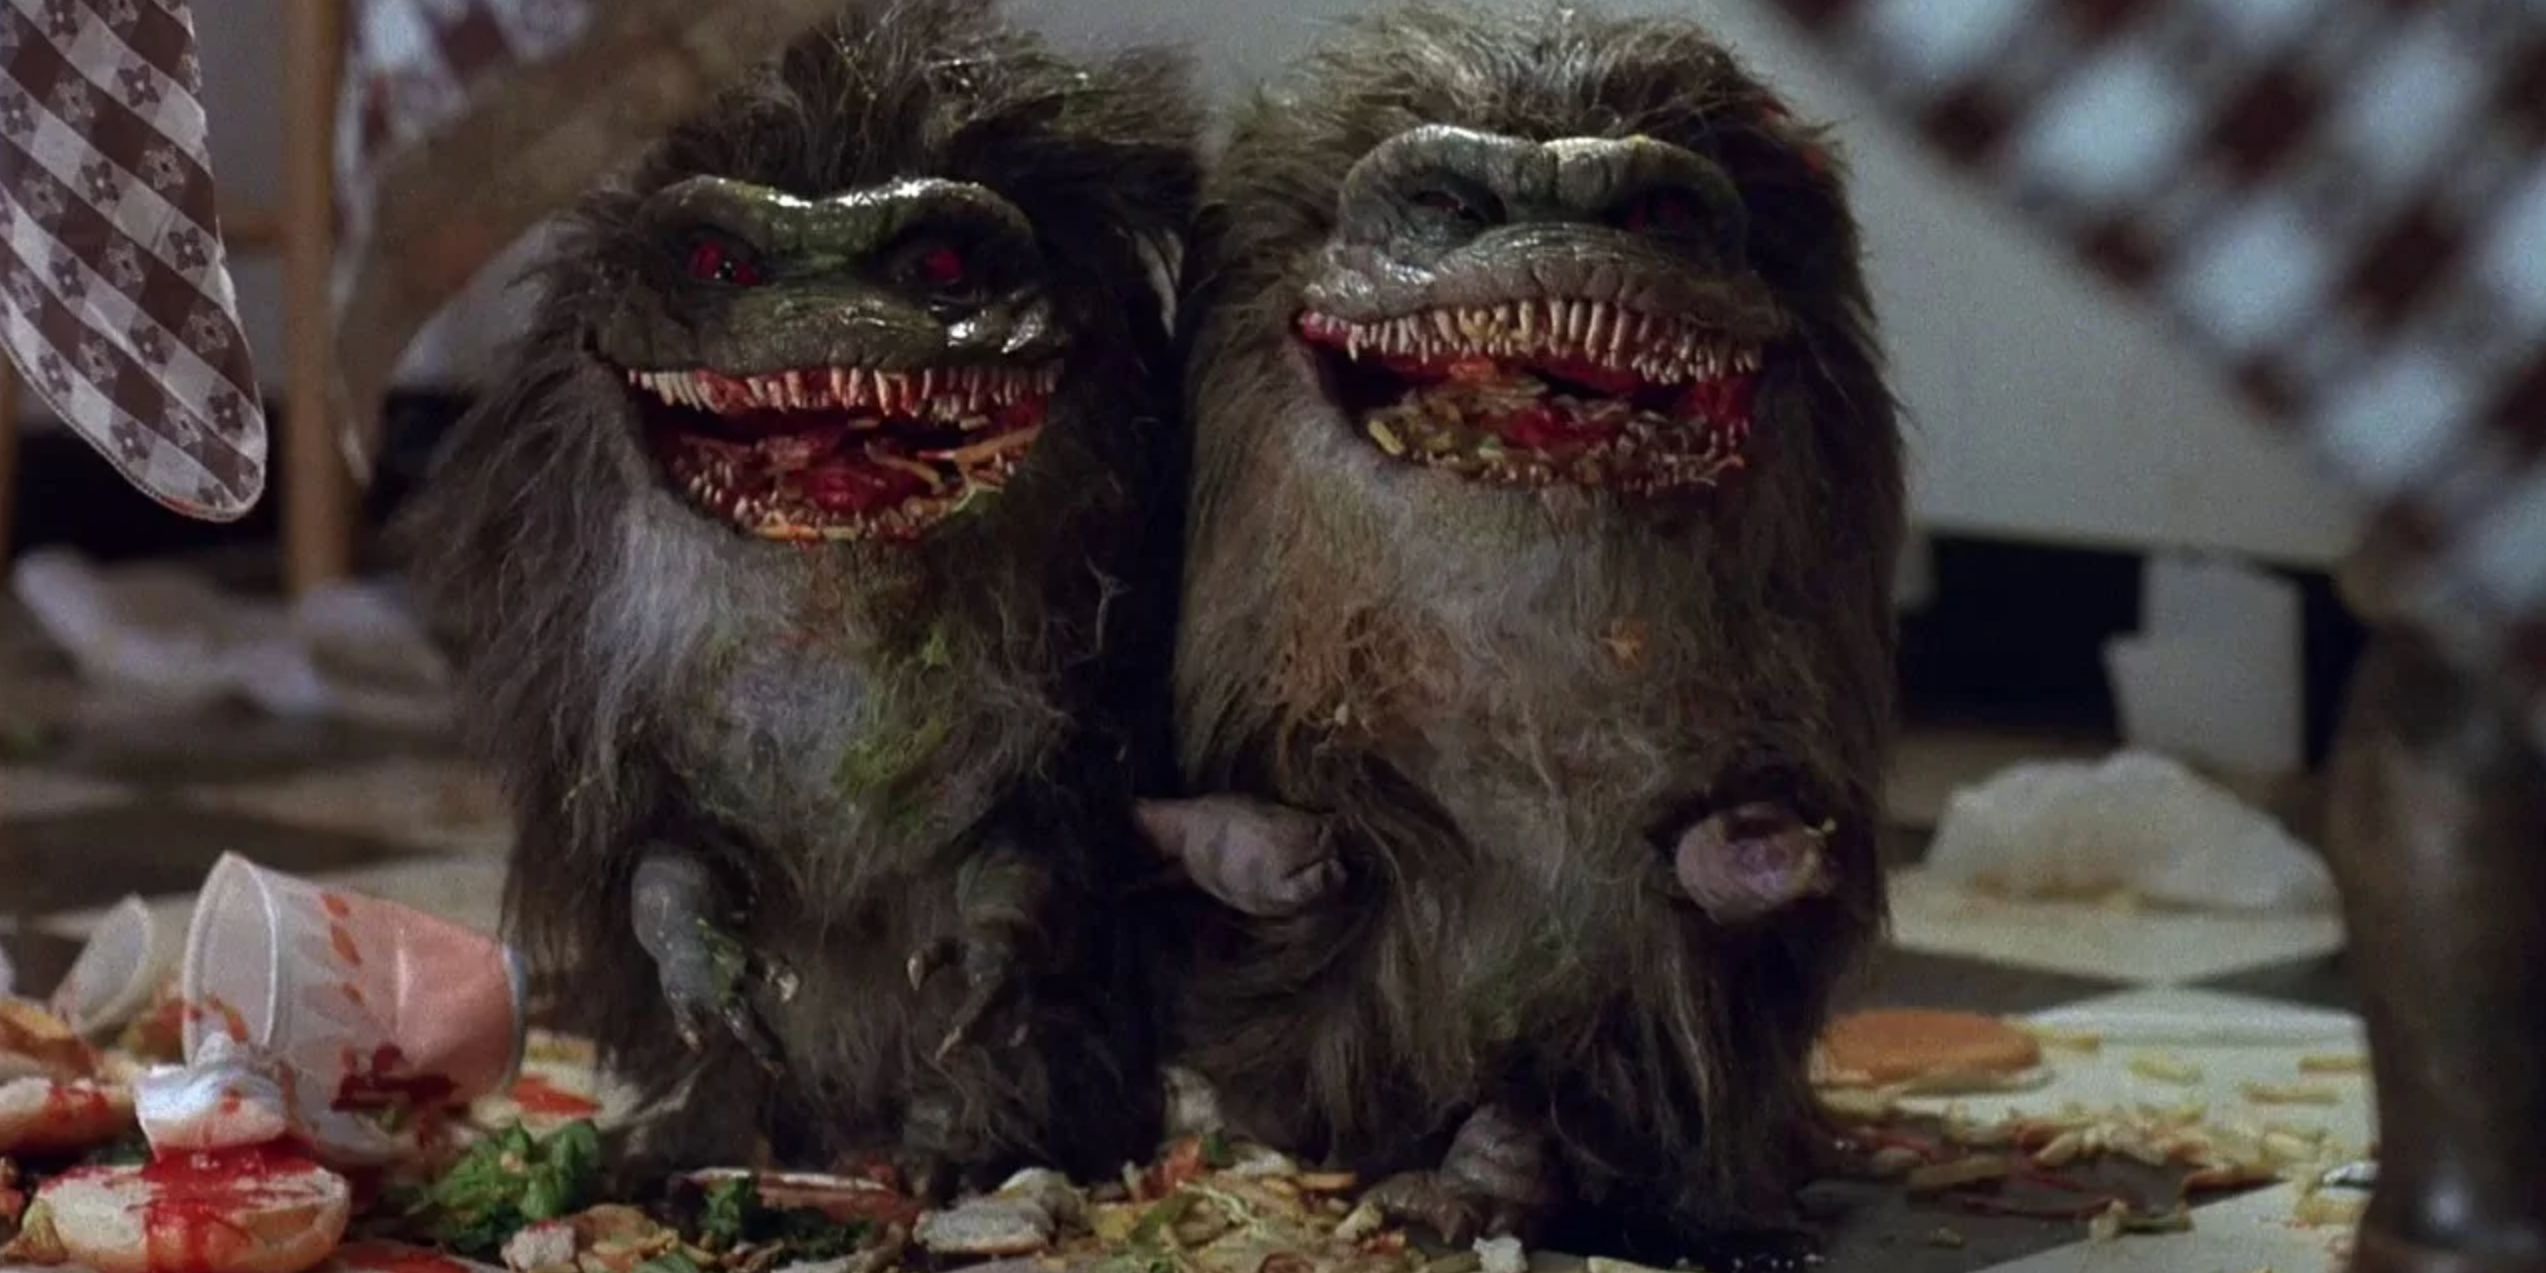 Two Crites enjoy leftovers in Critters